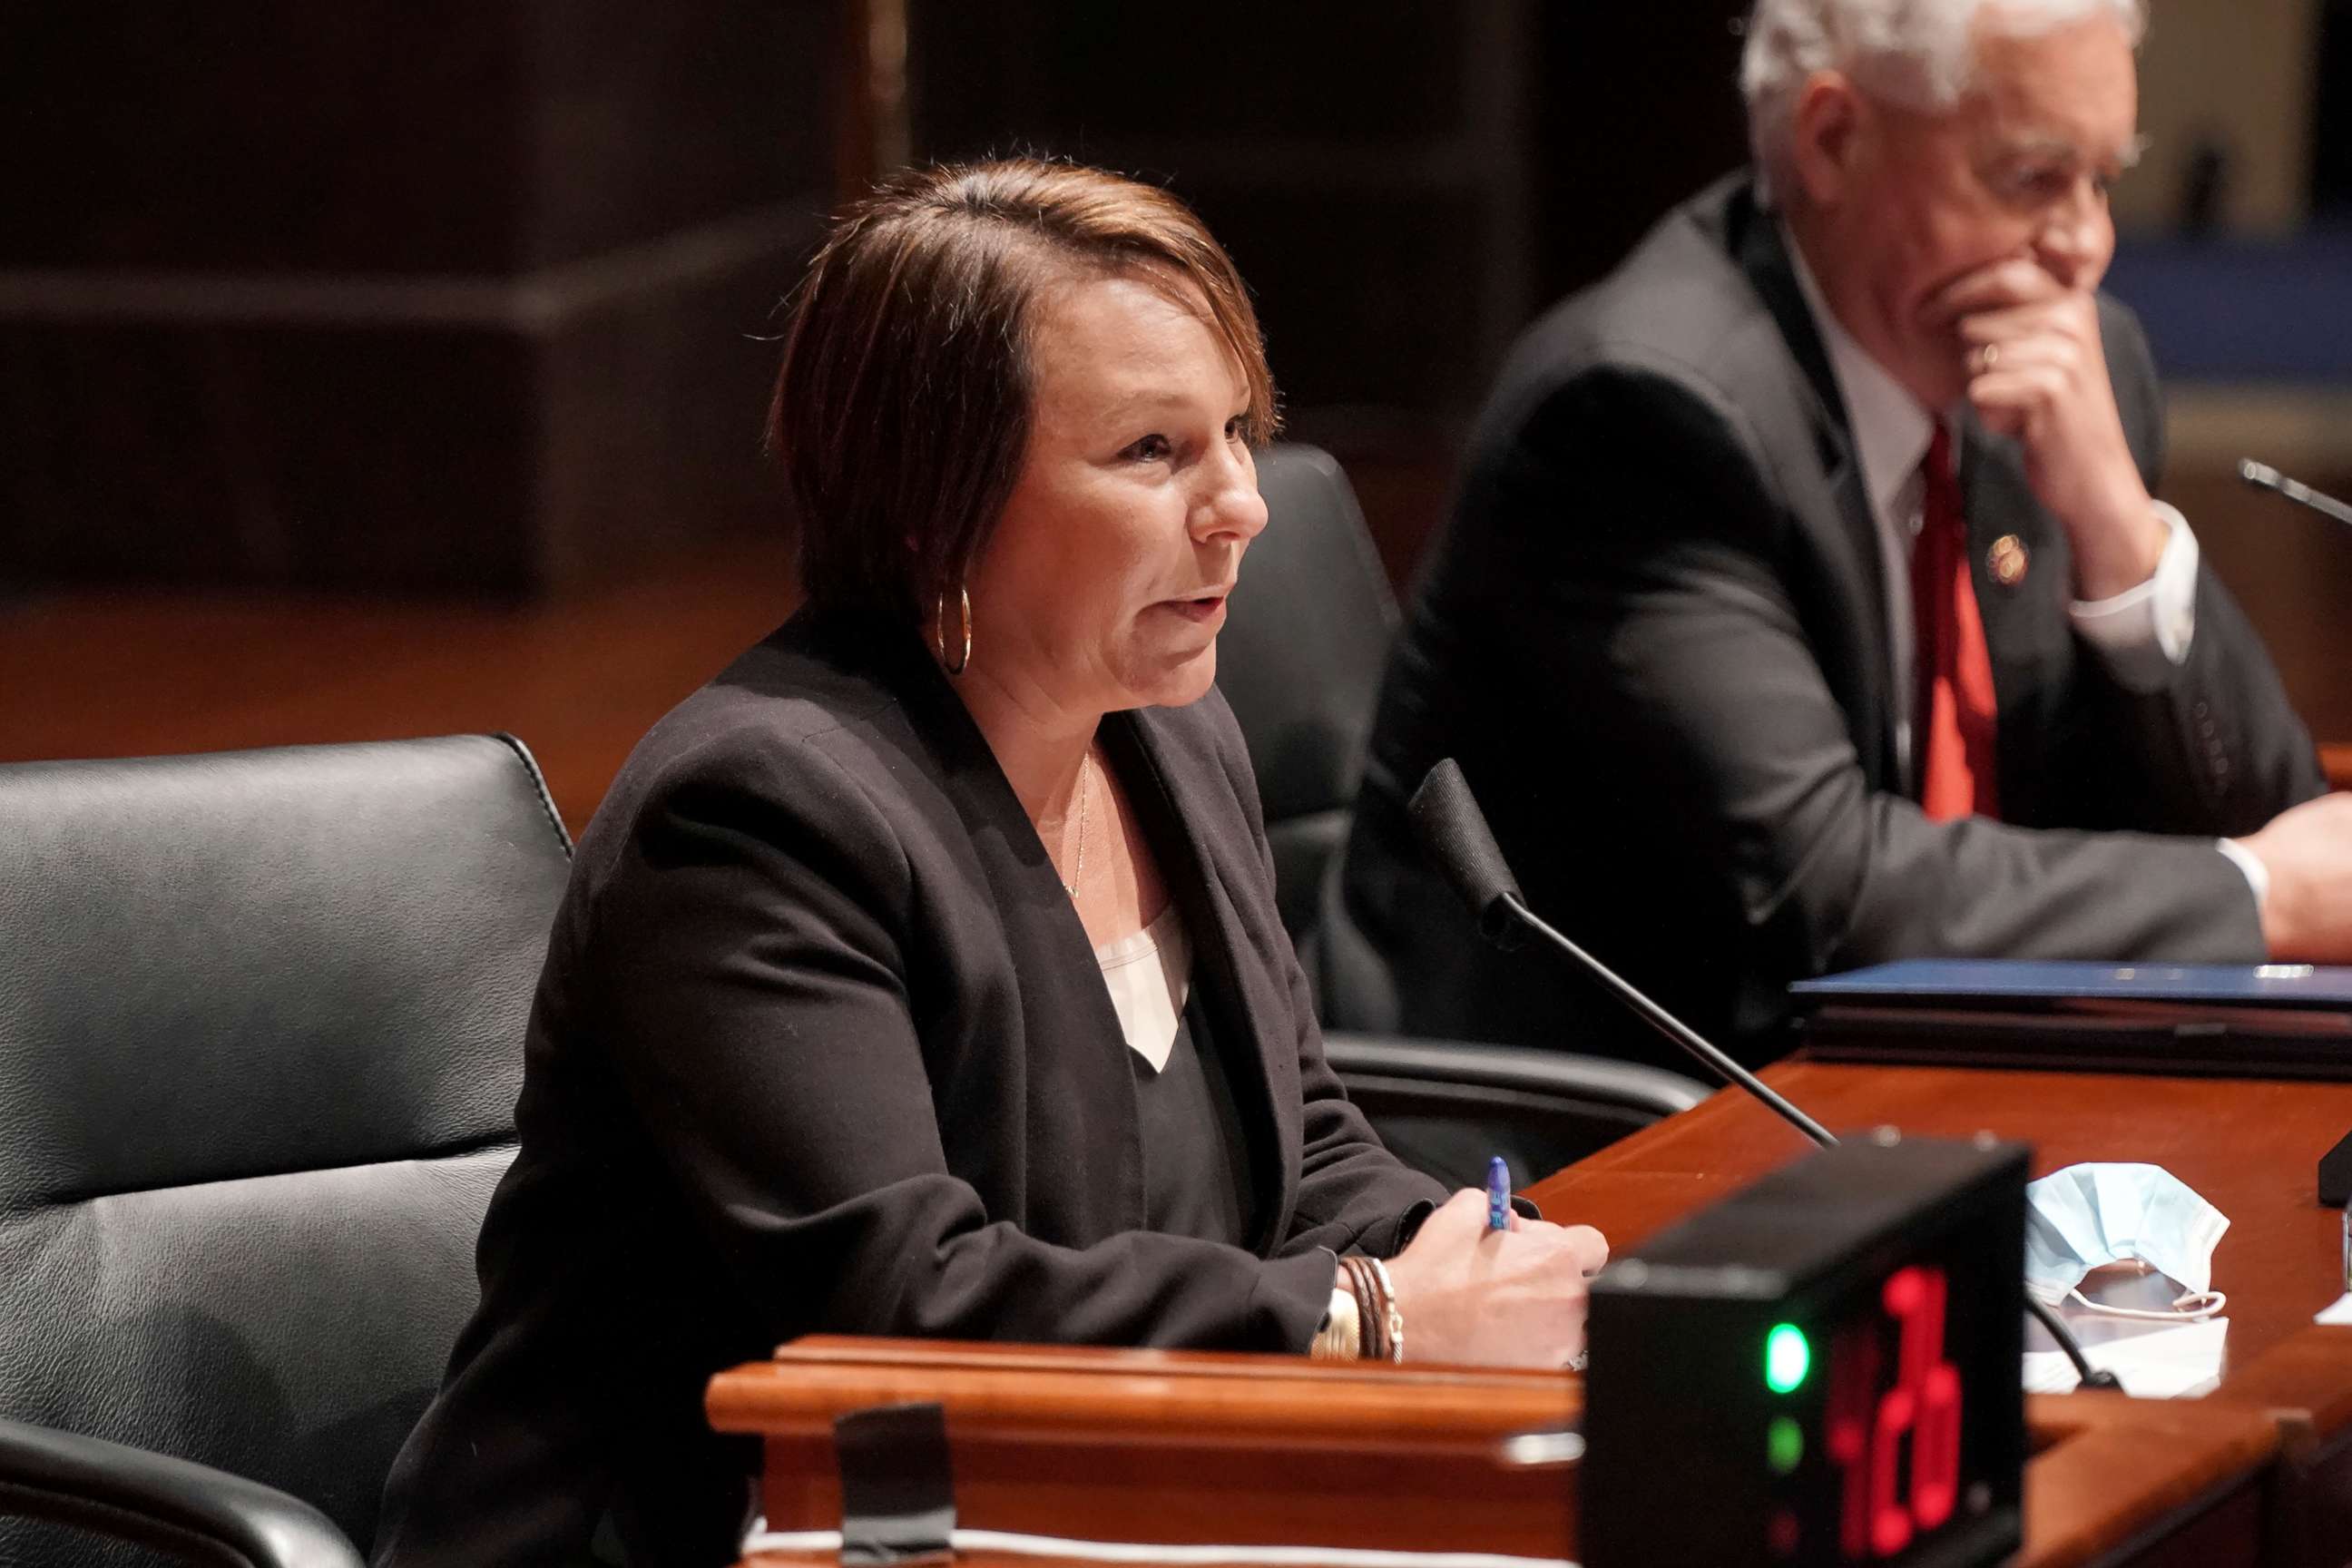 PHOTO: Rep. Martha Roby, R-Ala., asks questions during a House Judiciary Committee hearing on proposed changes to police practices and accountability on Capitol Hill, Wednesday, June 10, 2020, in Washington.